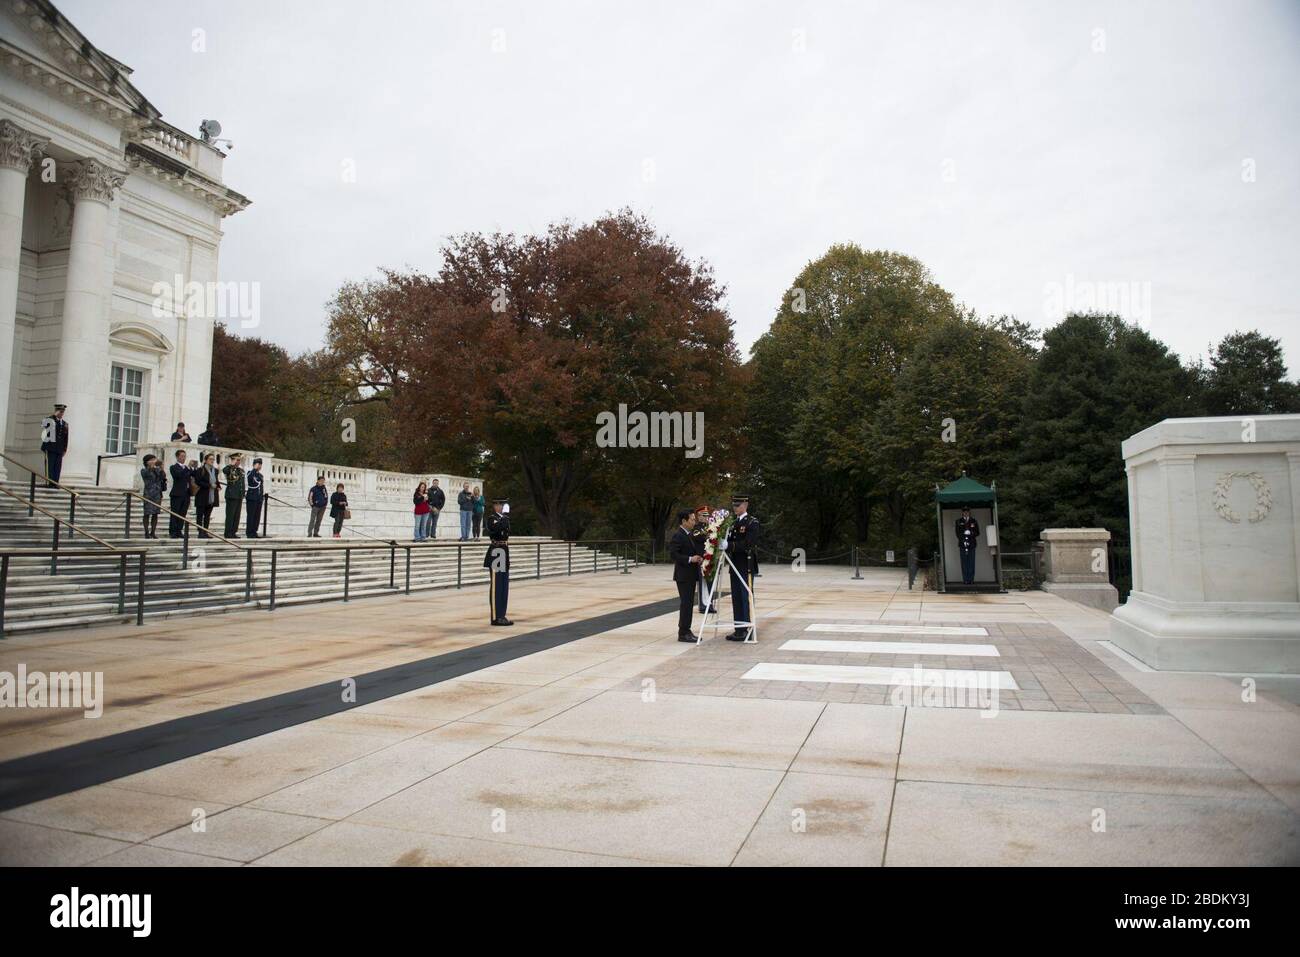 Gyeonggi Province Governor laid a wreath at the Tomb of the Unknown Soldier in Arlington National Cemetery Stock Photo